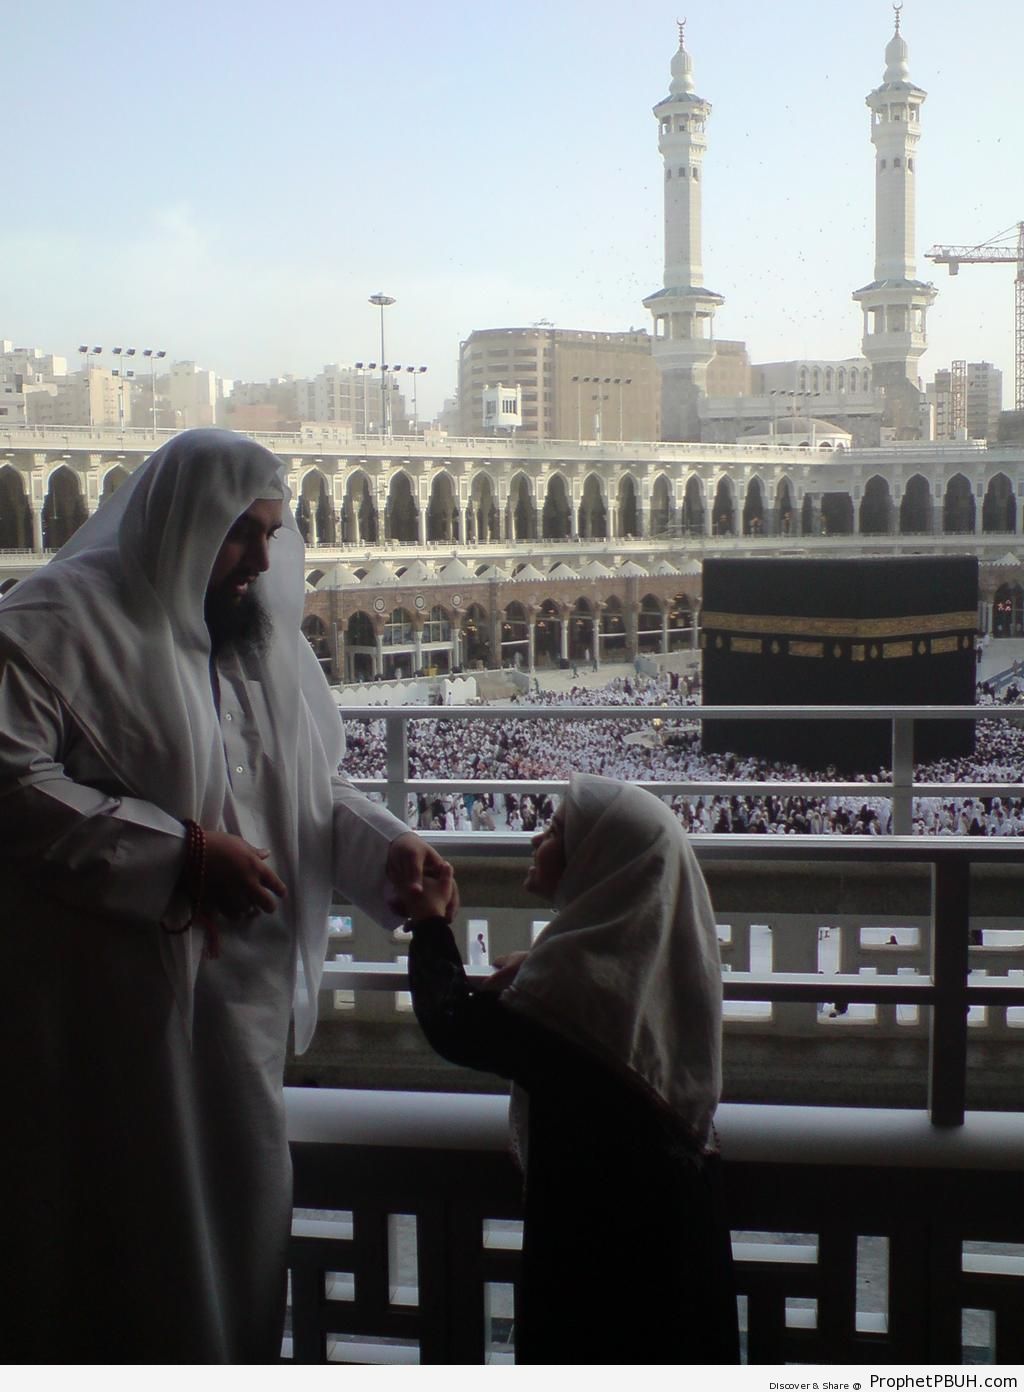 Father and Daughter at Masjid al-Haram in Makkah - al-Masjid al-Haram in Makkah, Saudi Arabia -Picture